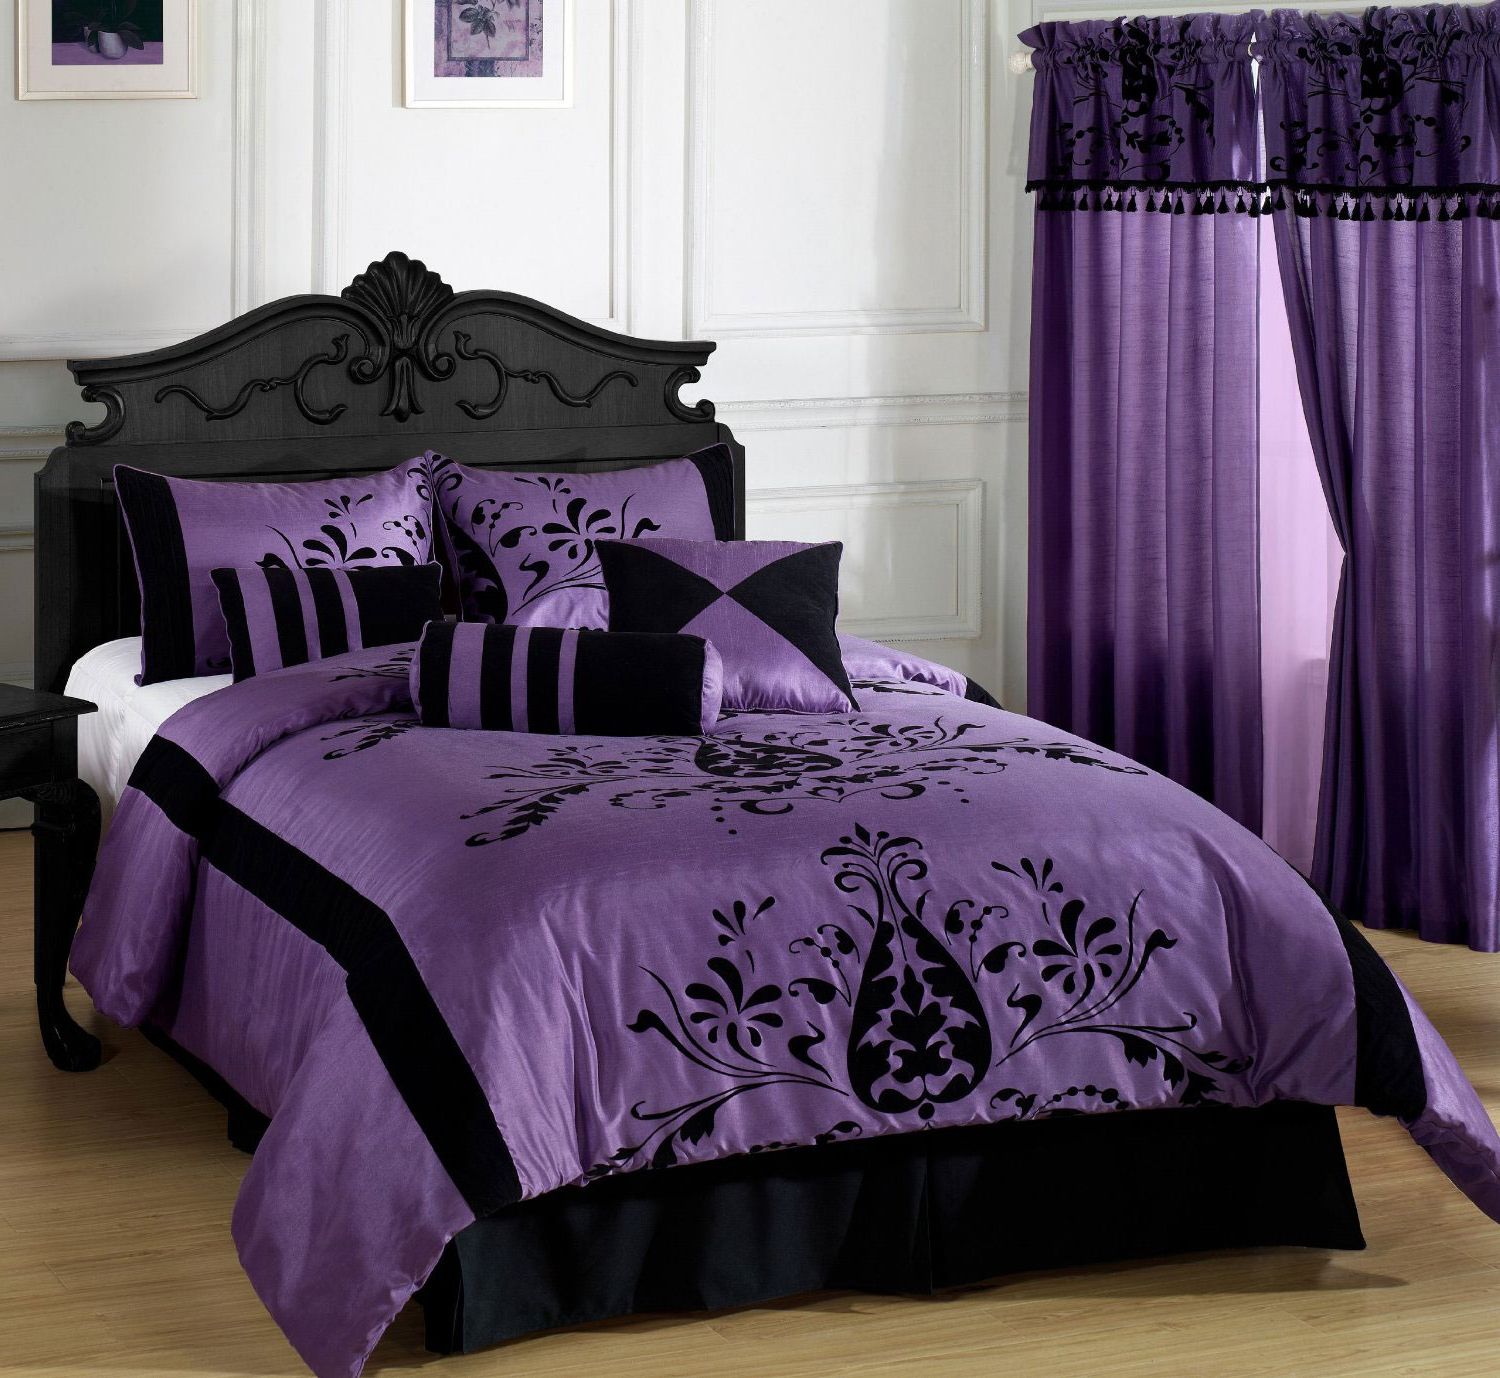 Gothic Bedroom In Purple And Black Color #8374 | House ...